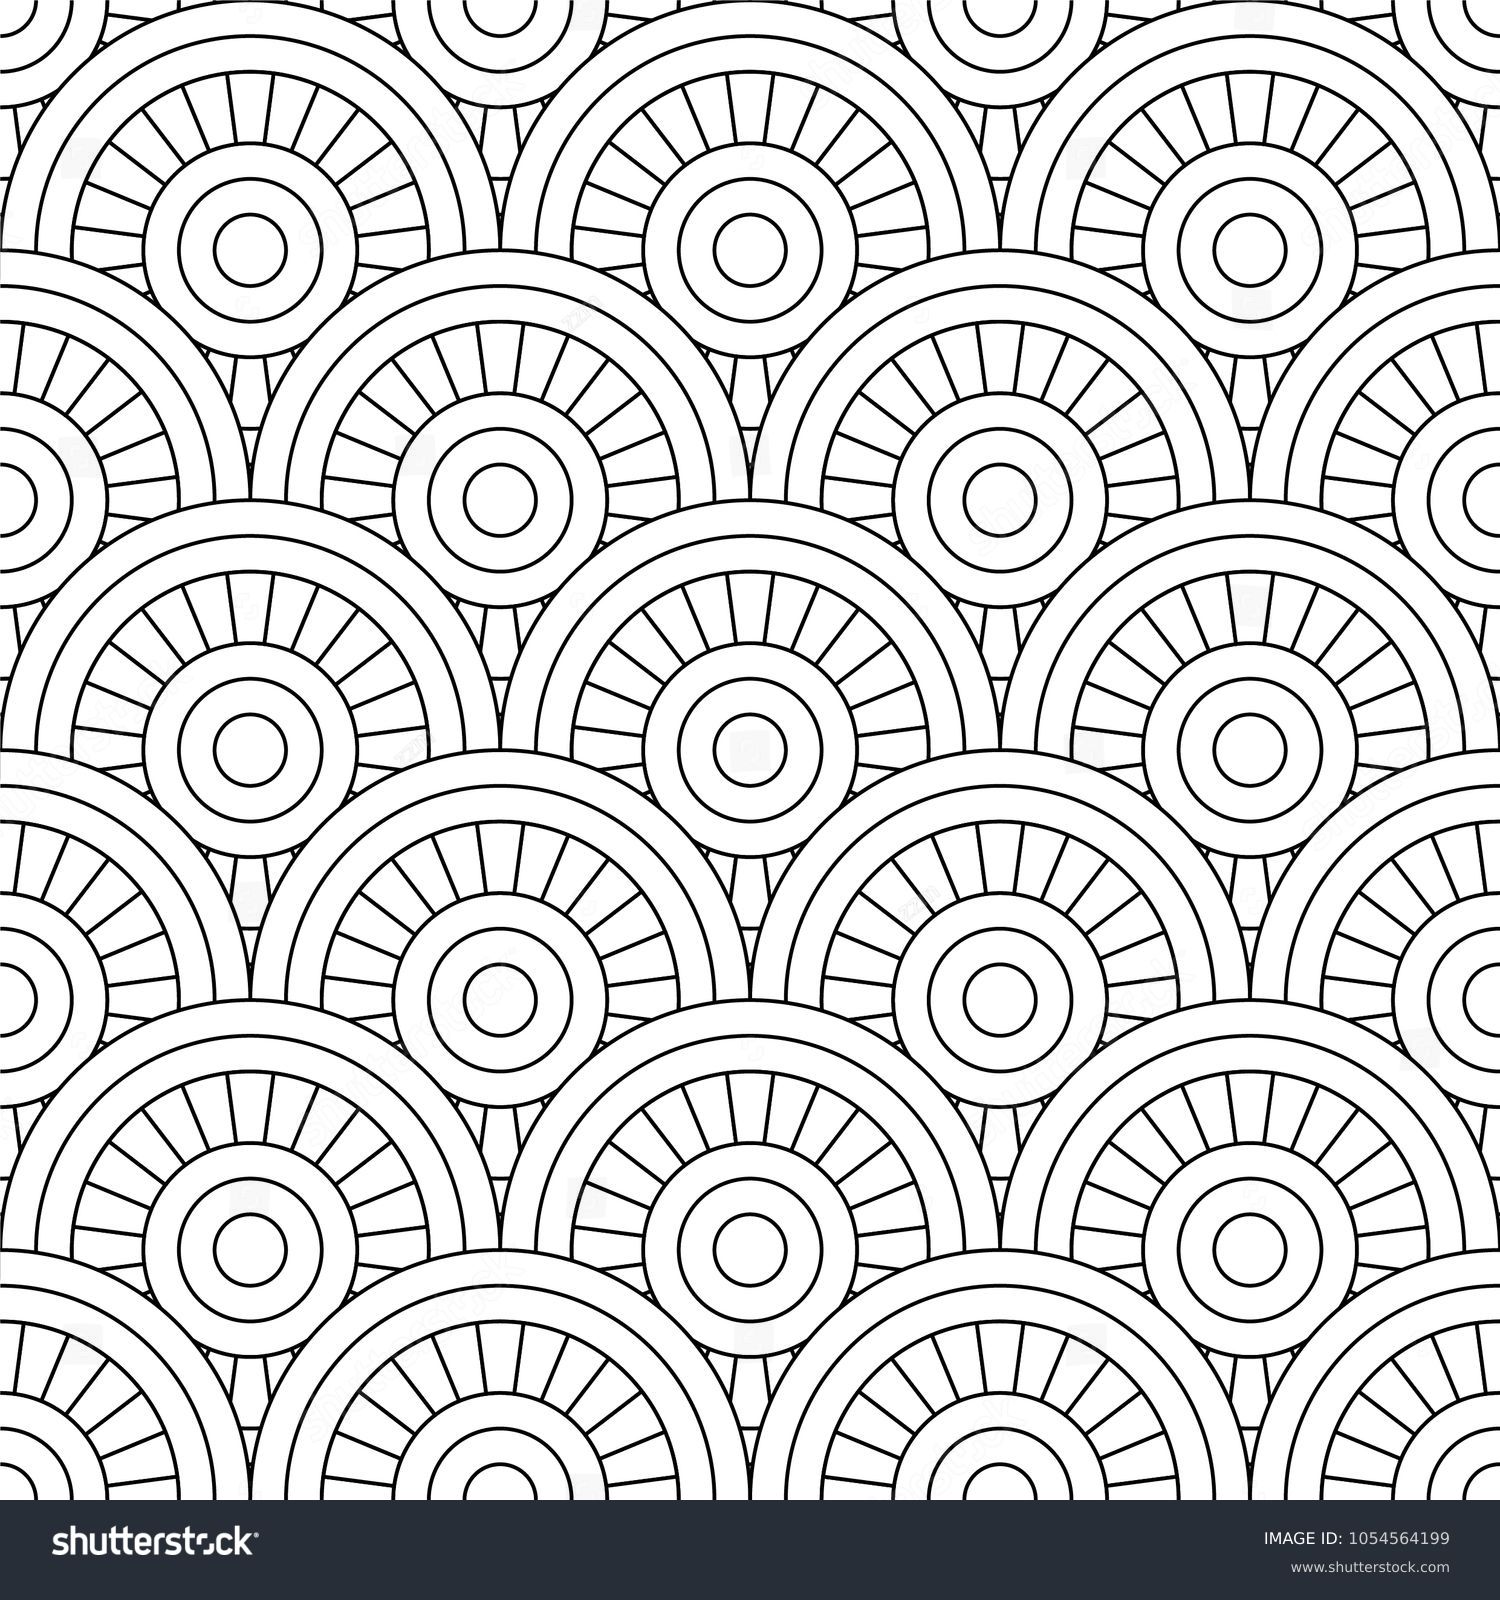 Black white geometric pattern coloring pages royalty